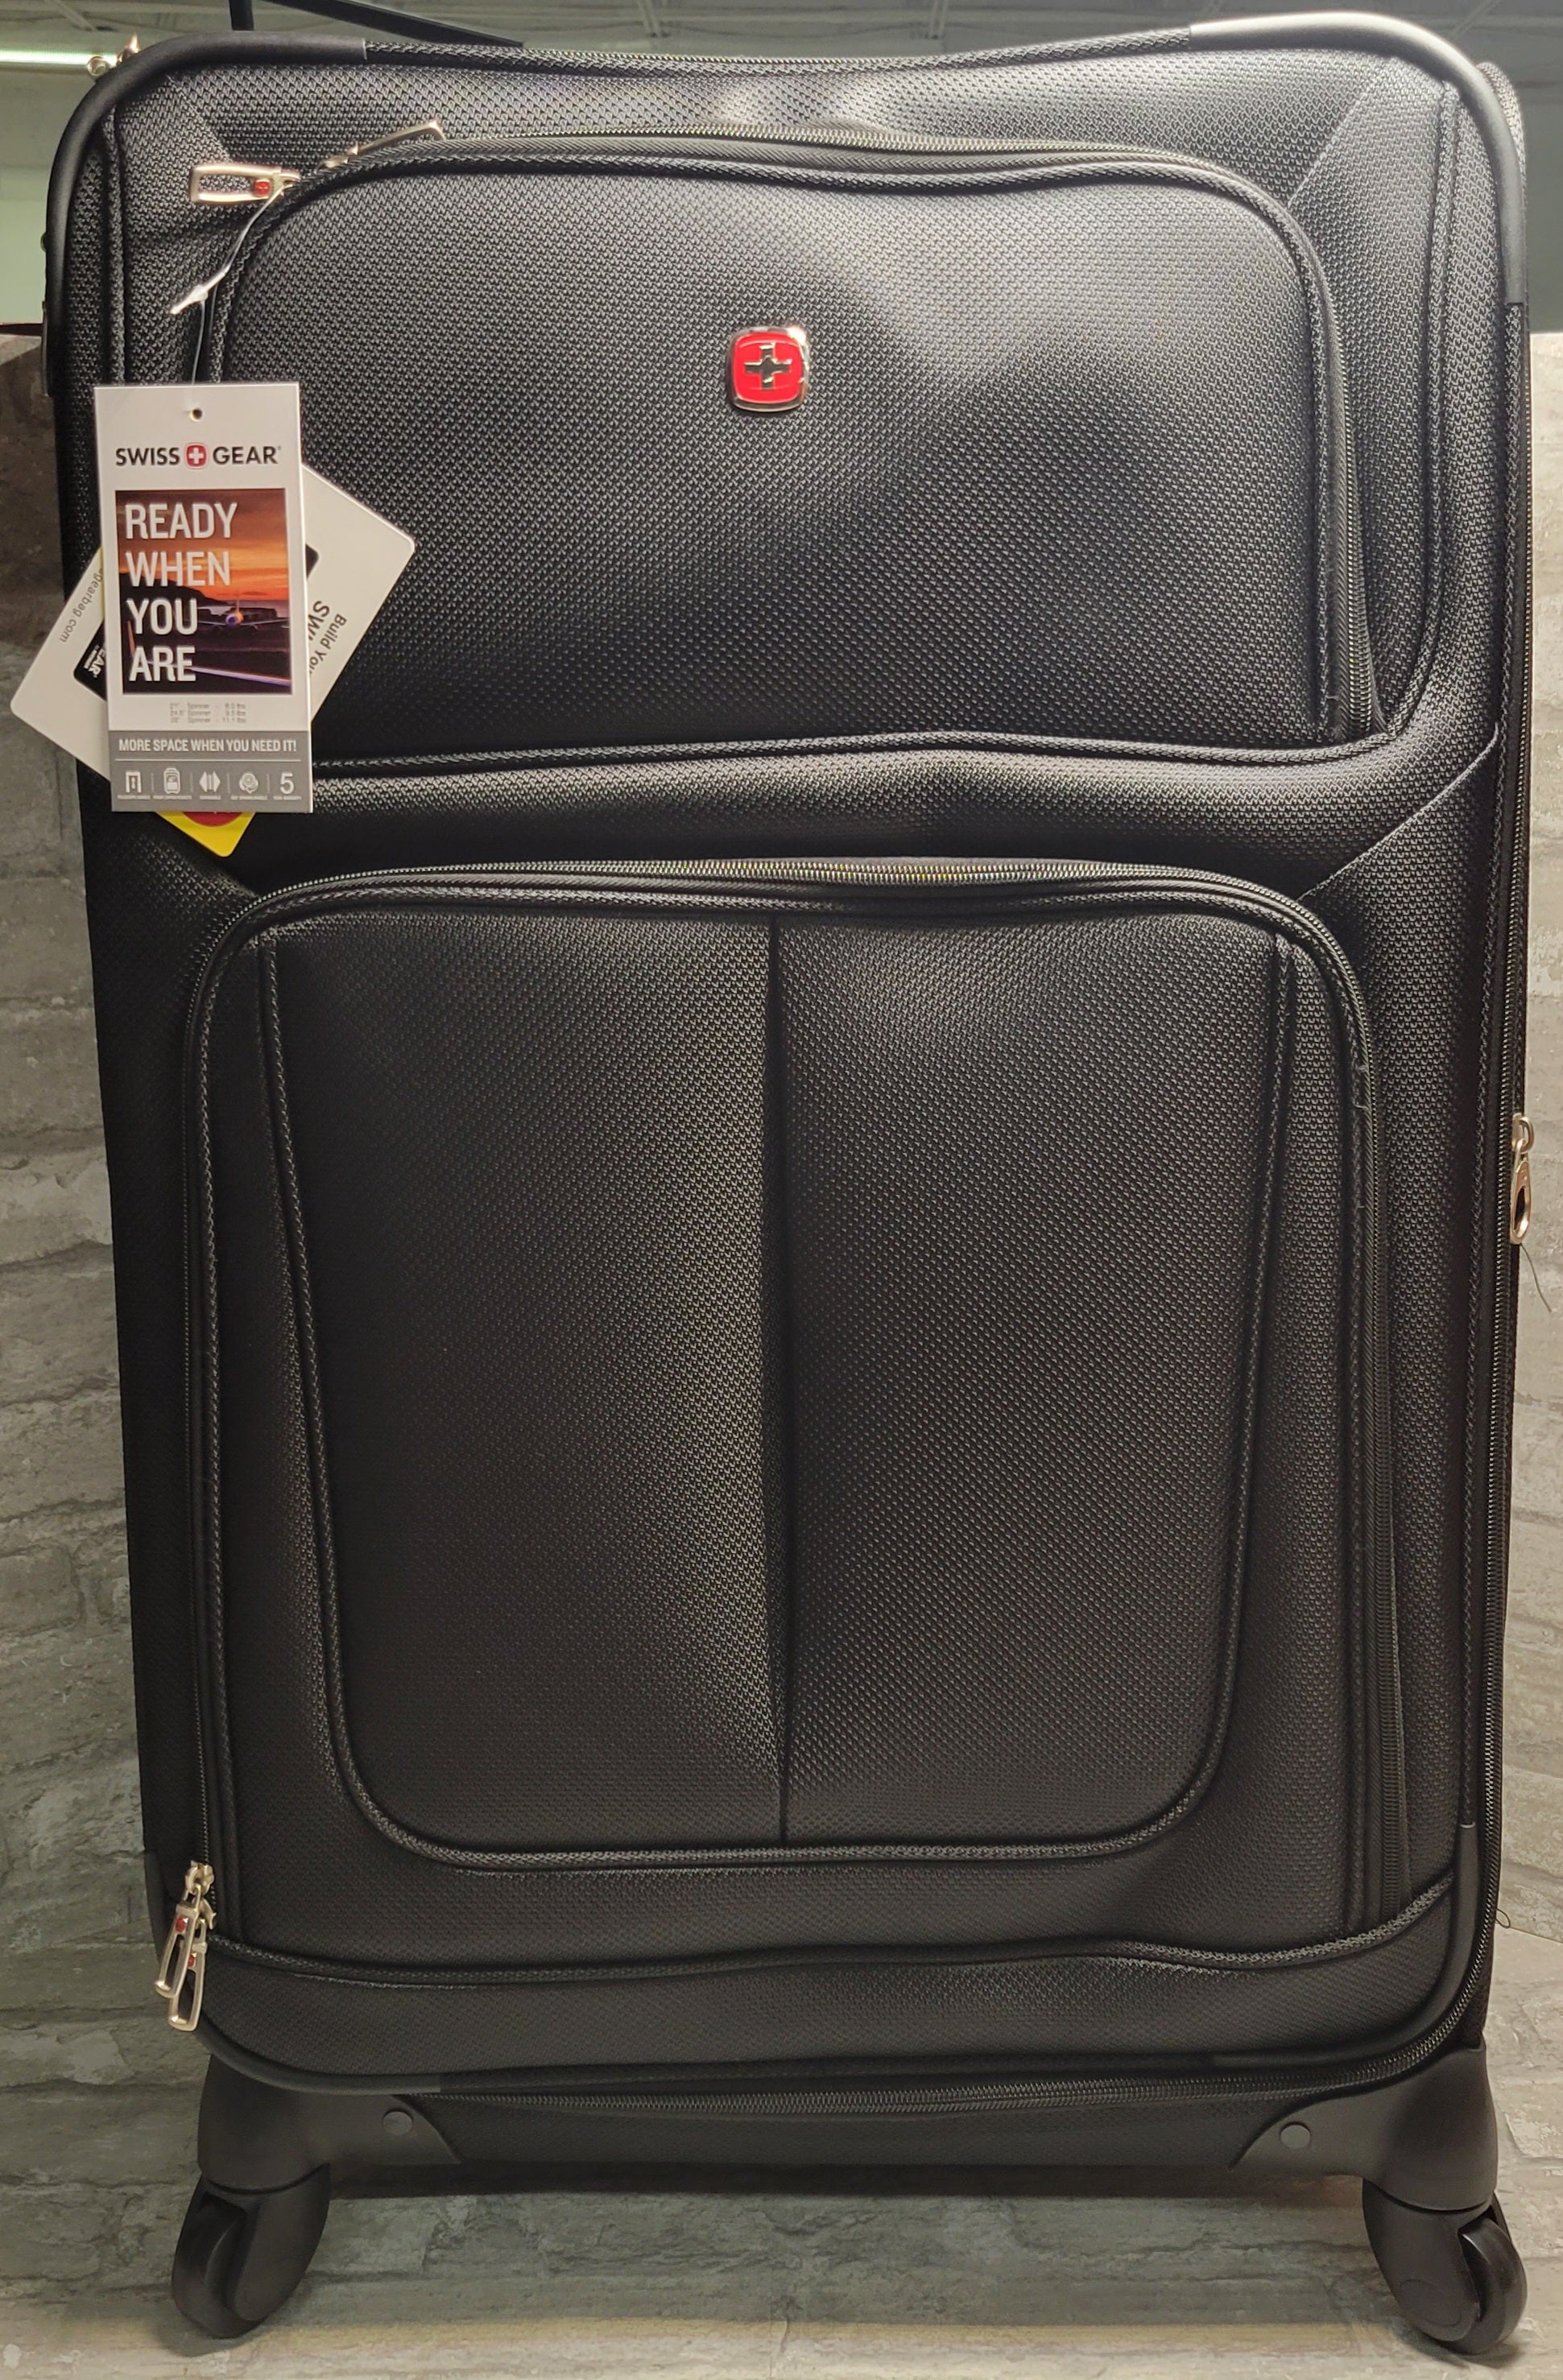 SwissGear Sion Softside Expandable Roller Luggage, Black, Checked-Large 29